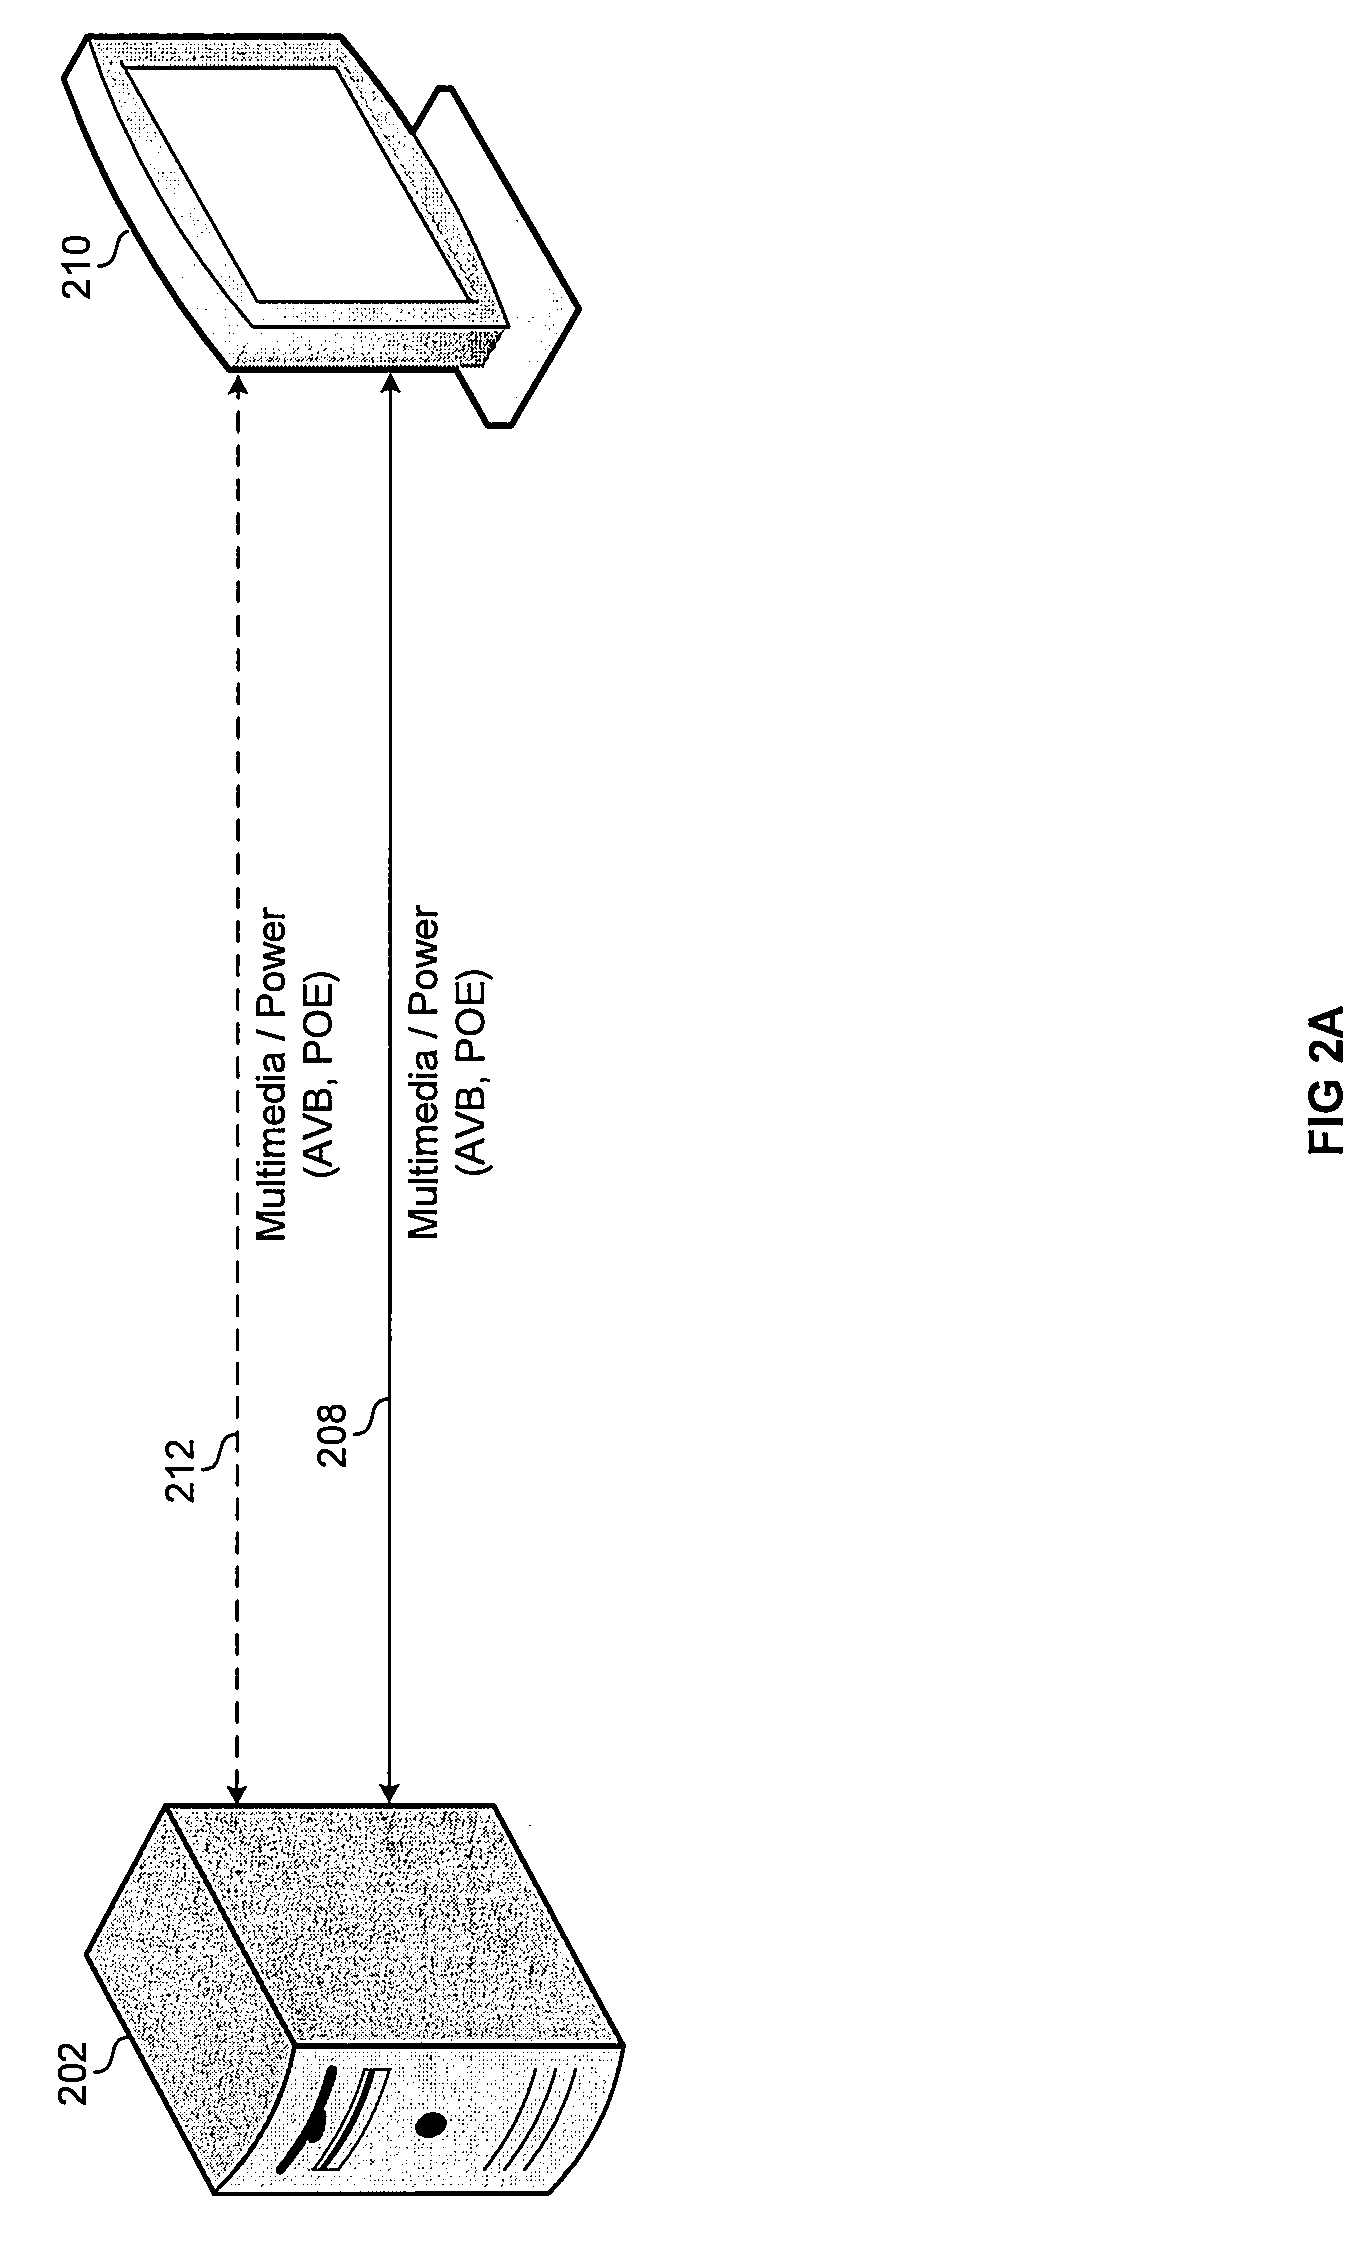 Method And System For Utilizing A Single Connection For Efficient Delivery Of Power And Multimedia Information